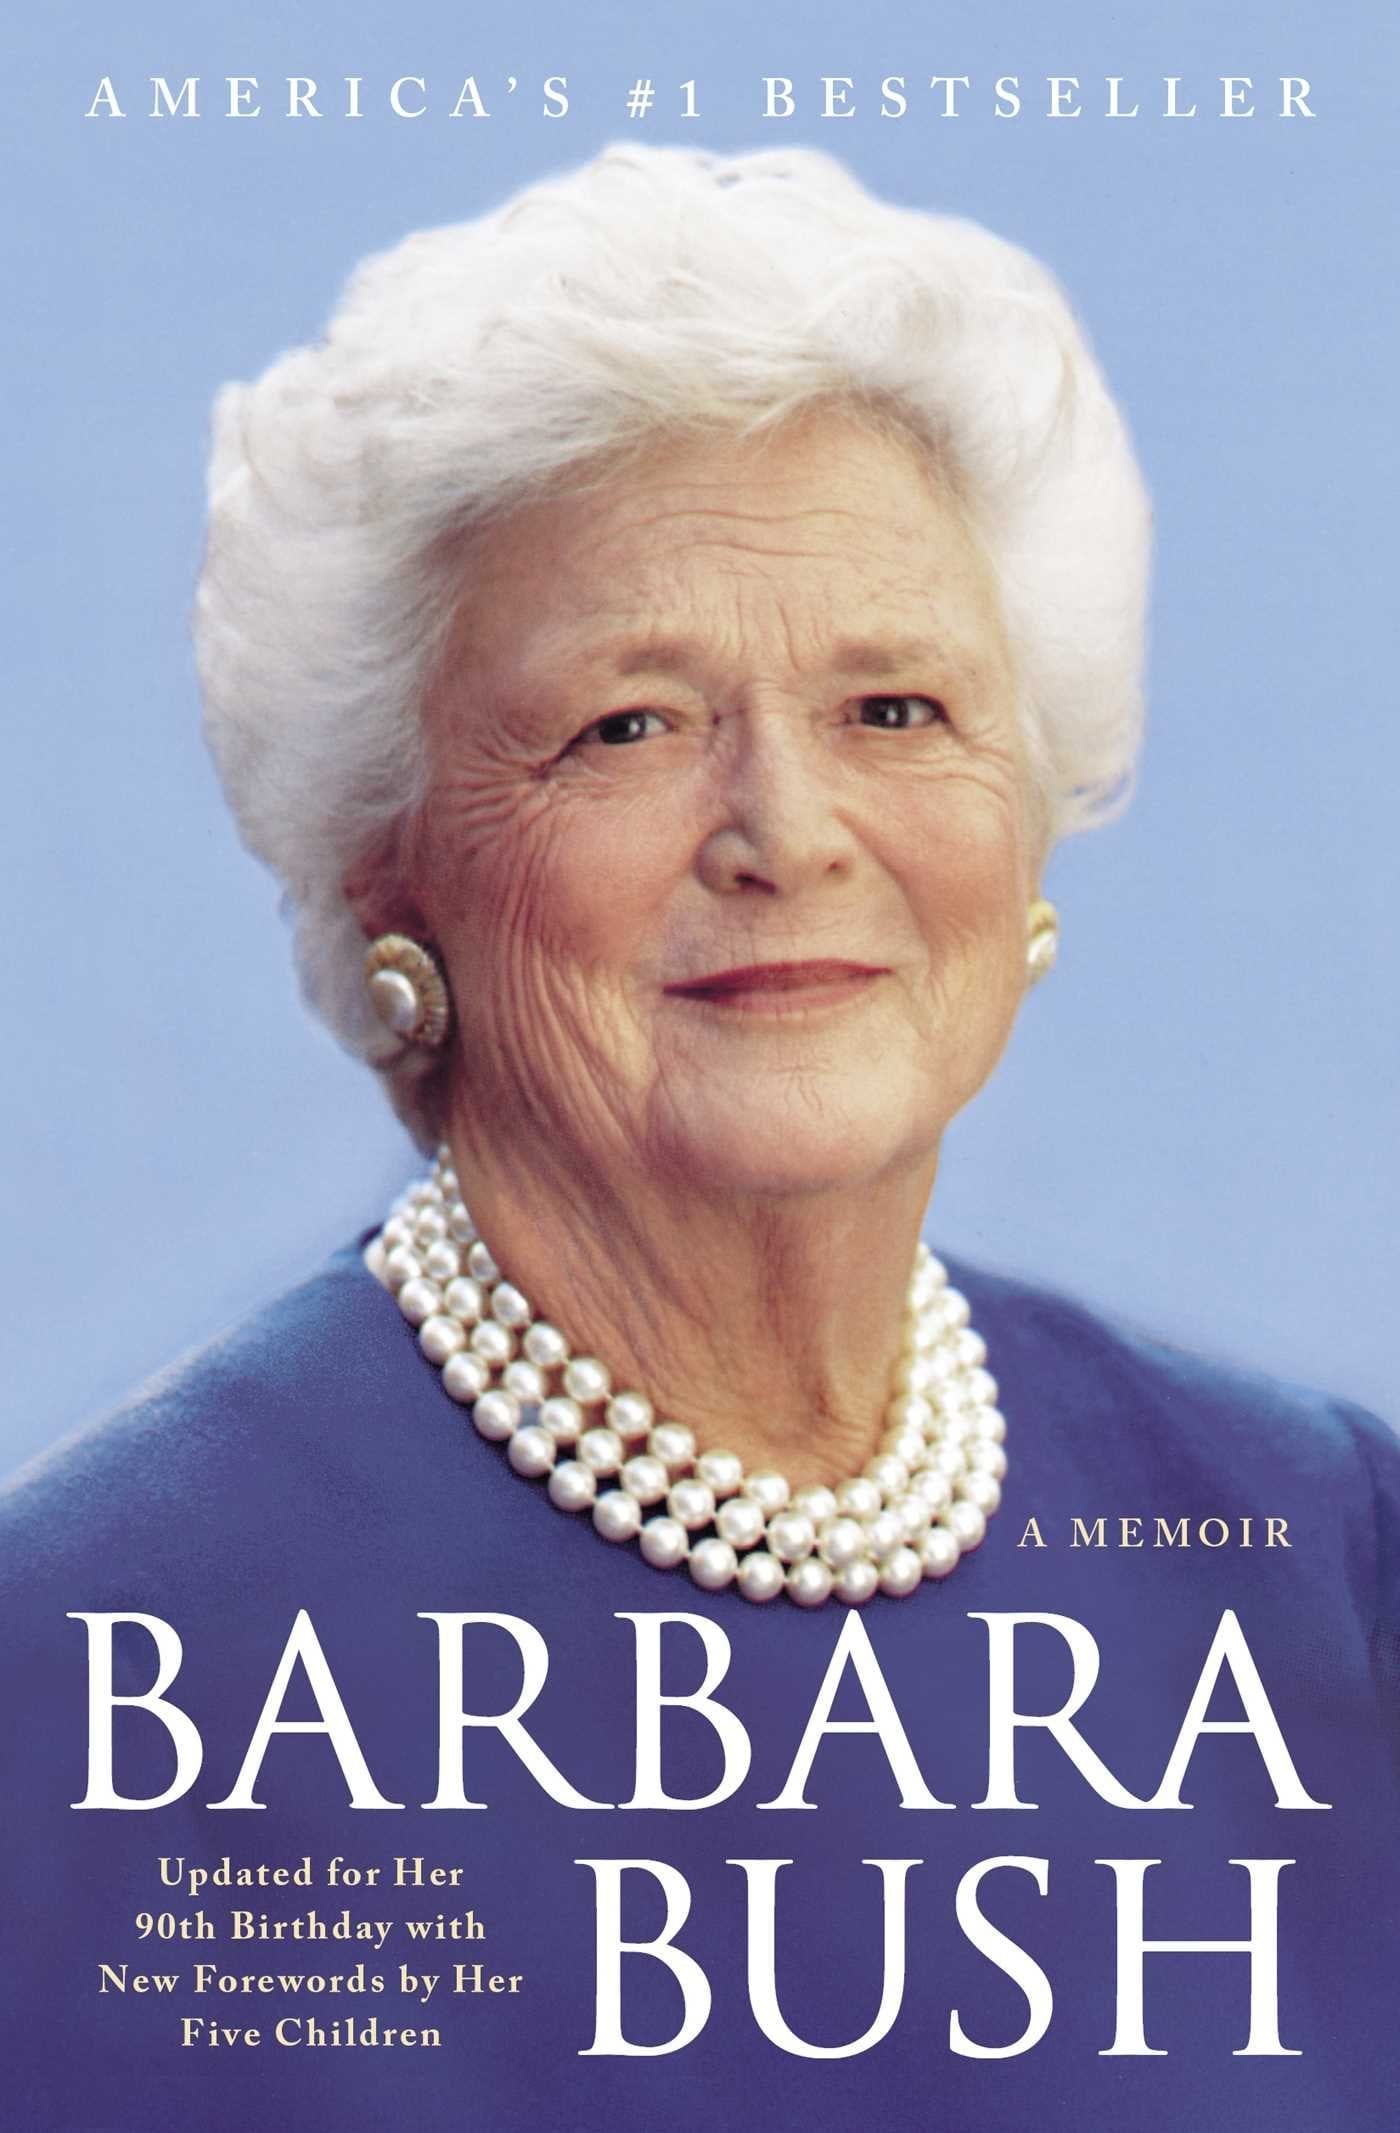 5 Books by First Ladies of the United States_Barbara Bush: A Memoir